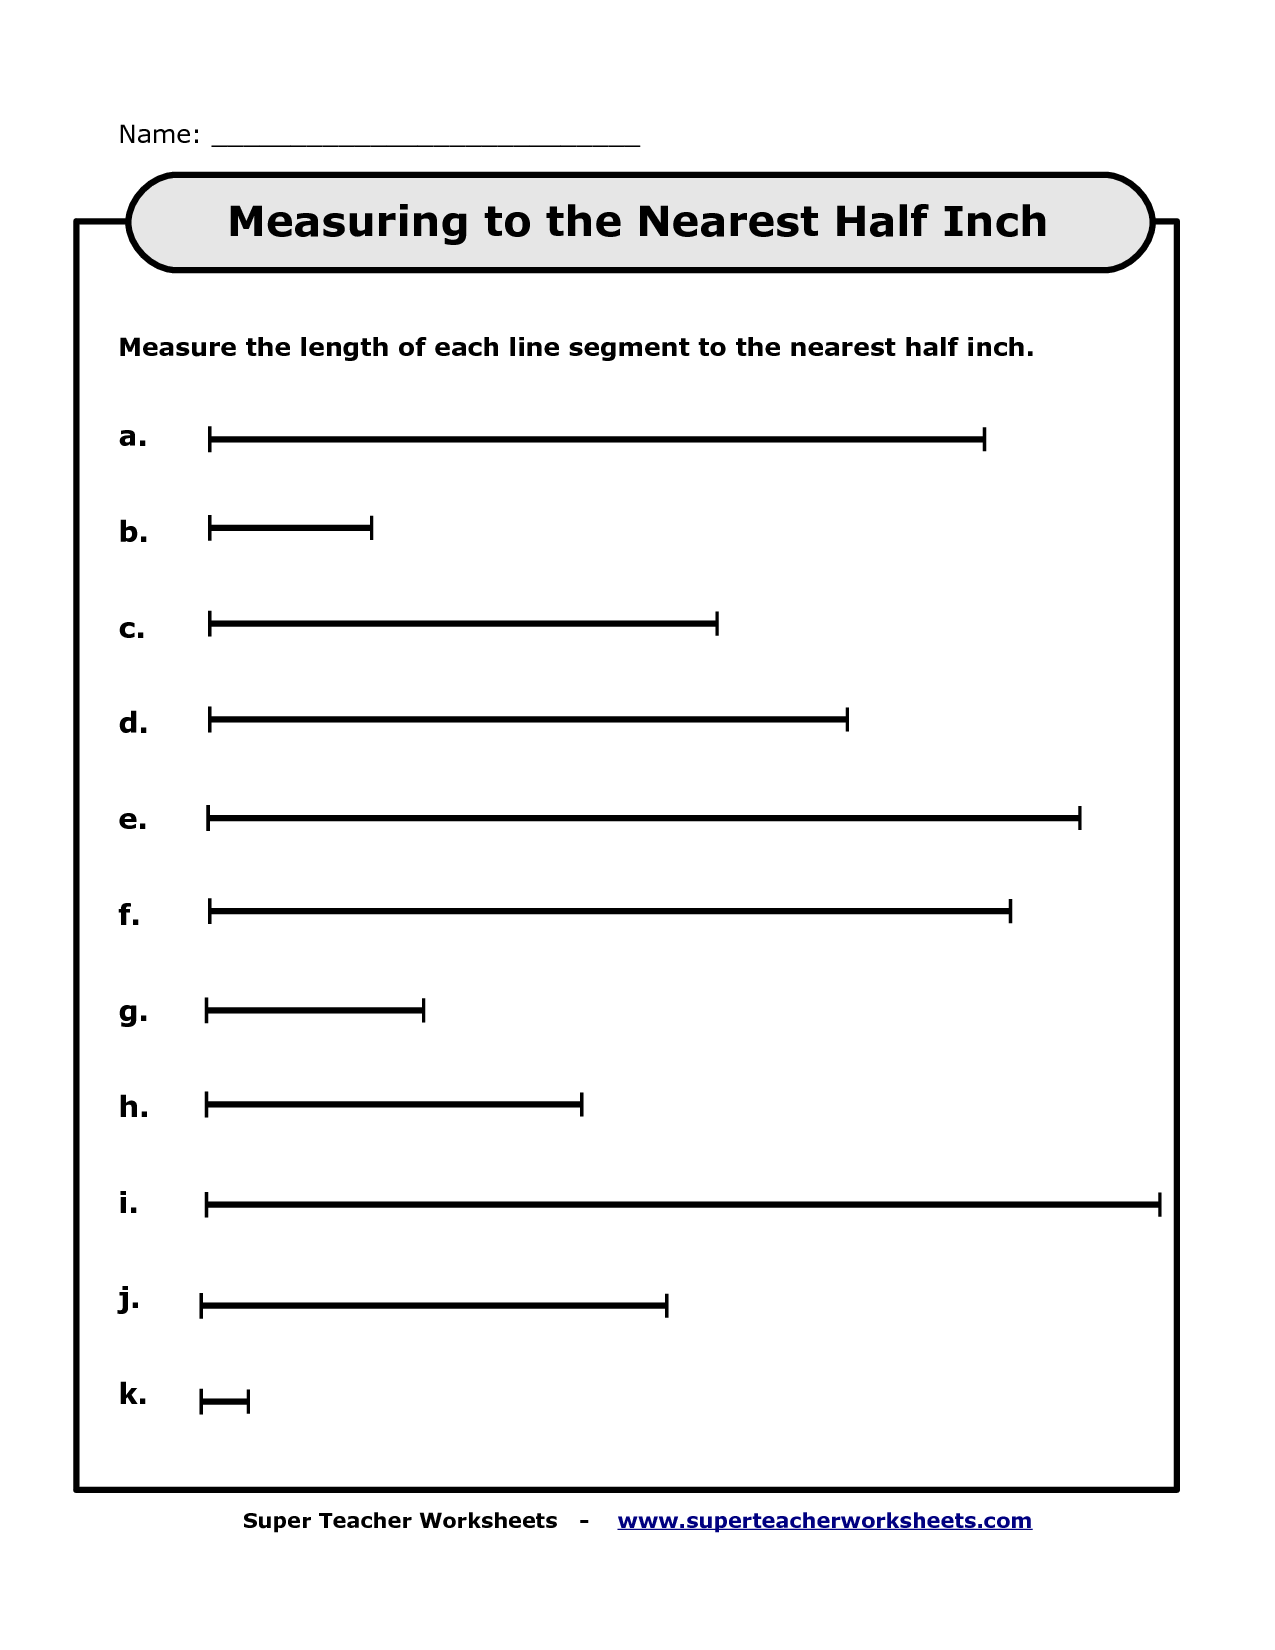 To the Nearest Half Inch Measuring Worksheets